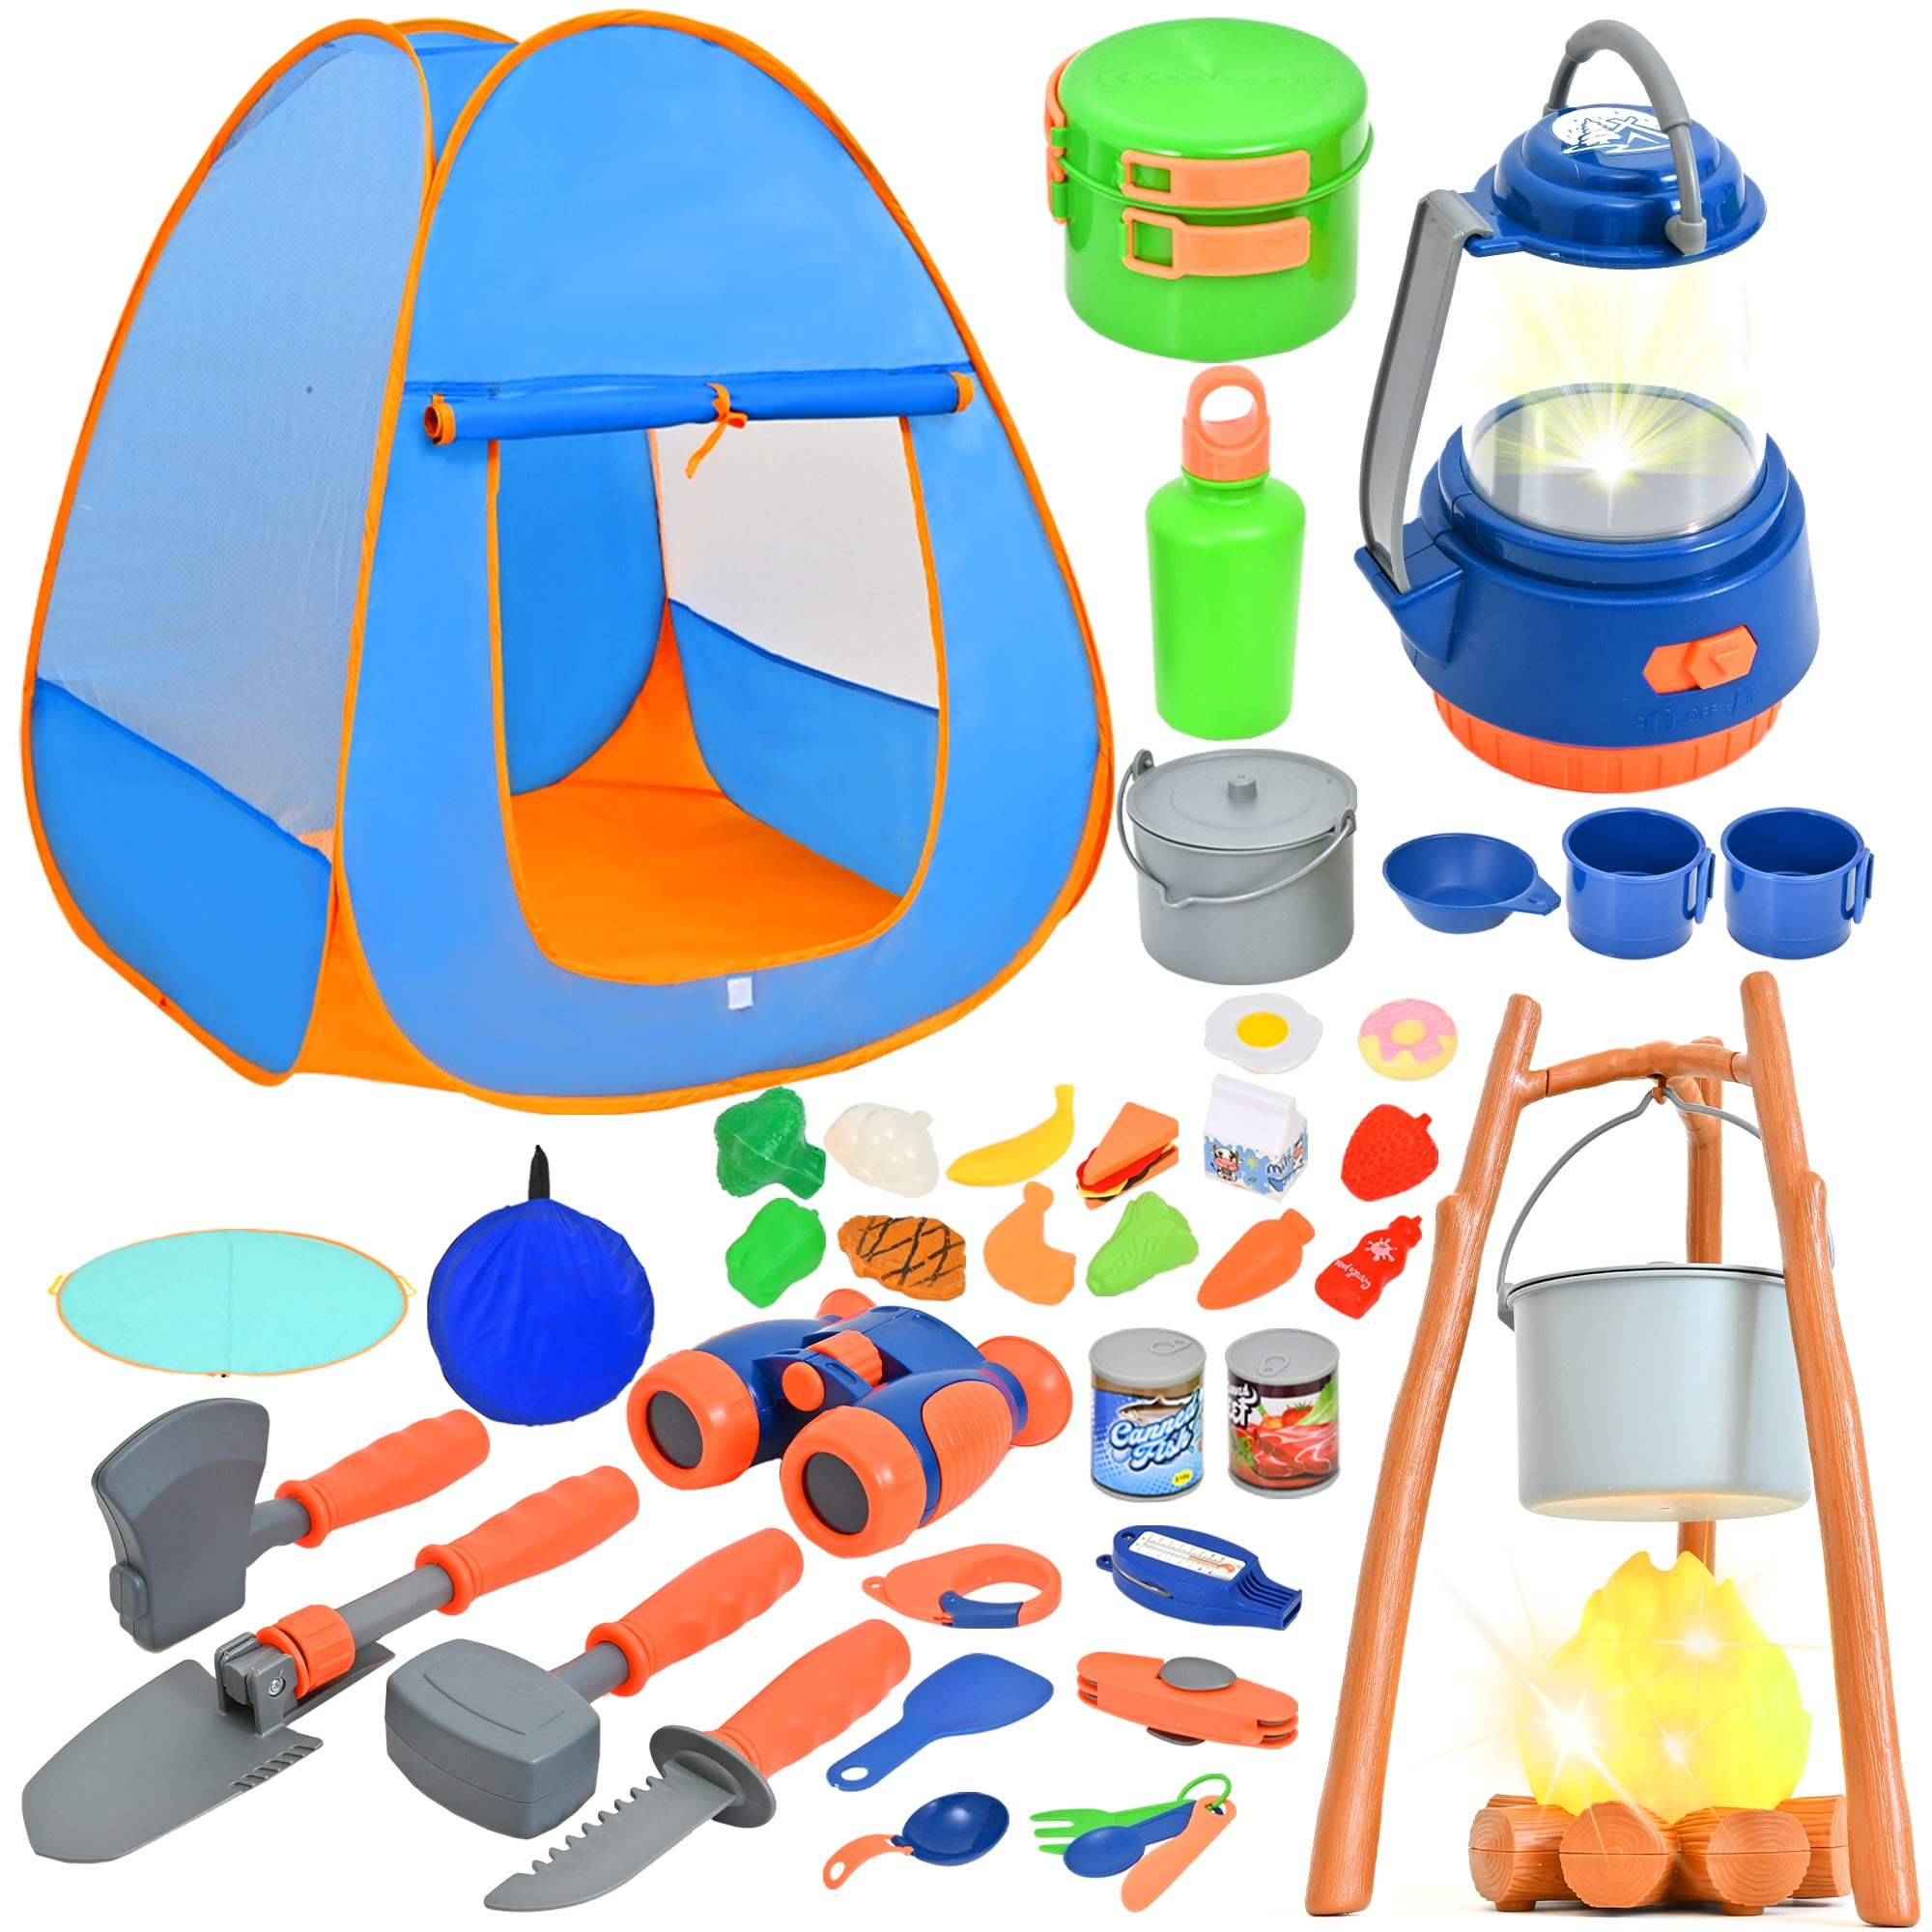 Kids Camping Set with Tent 45PCS - Camping Toy Set for Indoor/Outdoor Kids,  Pretend Play Camp Gear Tools With LED Fire, Flashlight, Compass, Whistle